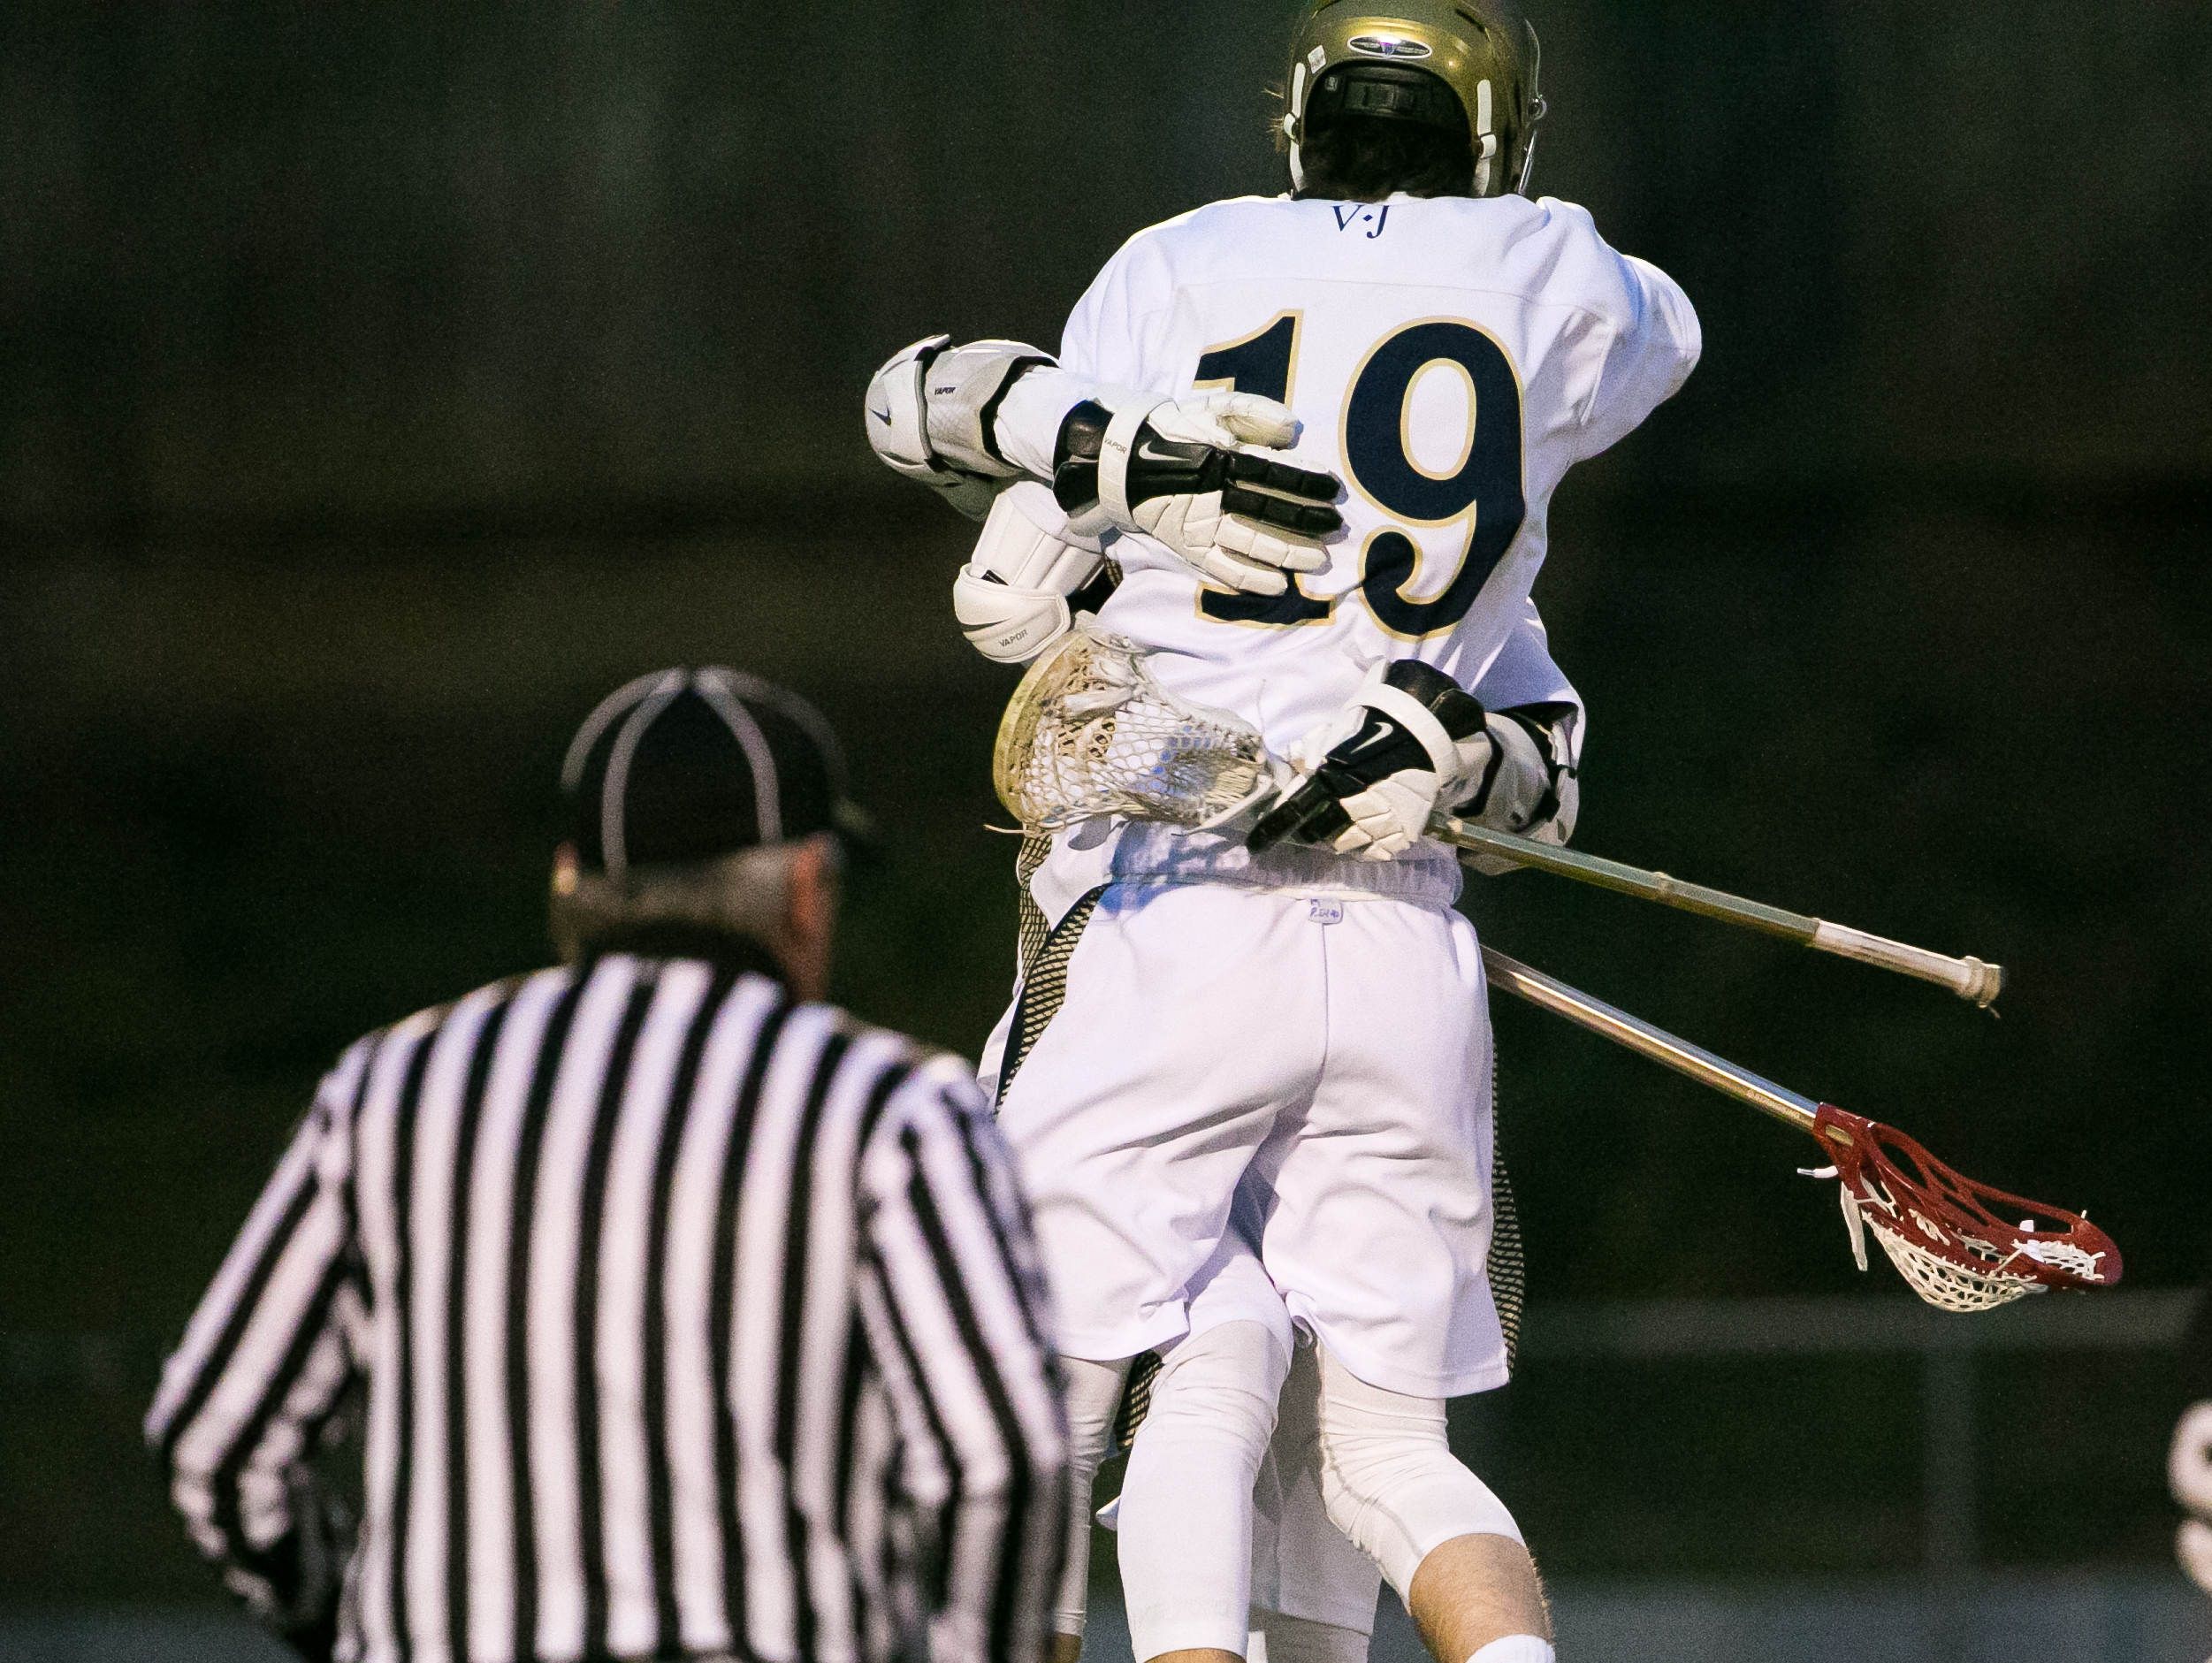 Patrick Drake celebrates after scoring to give Salesianum their first point of the game.